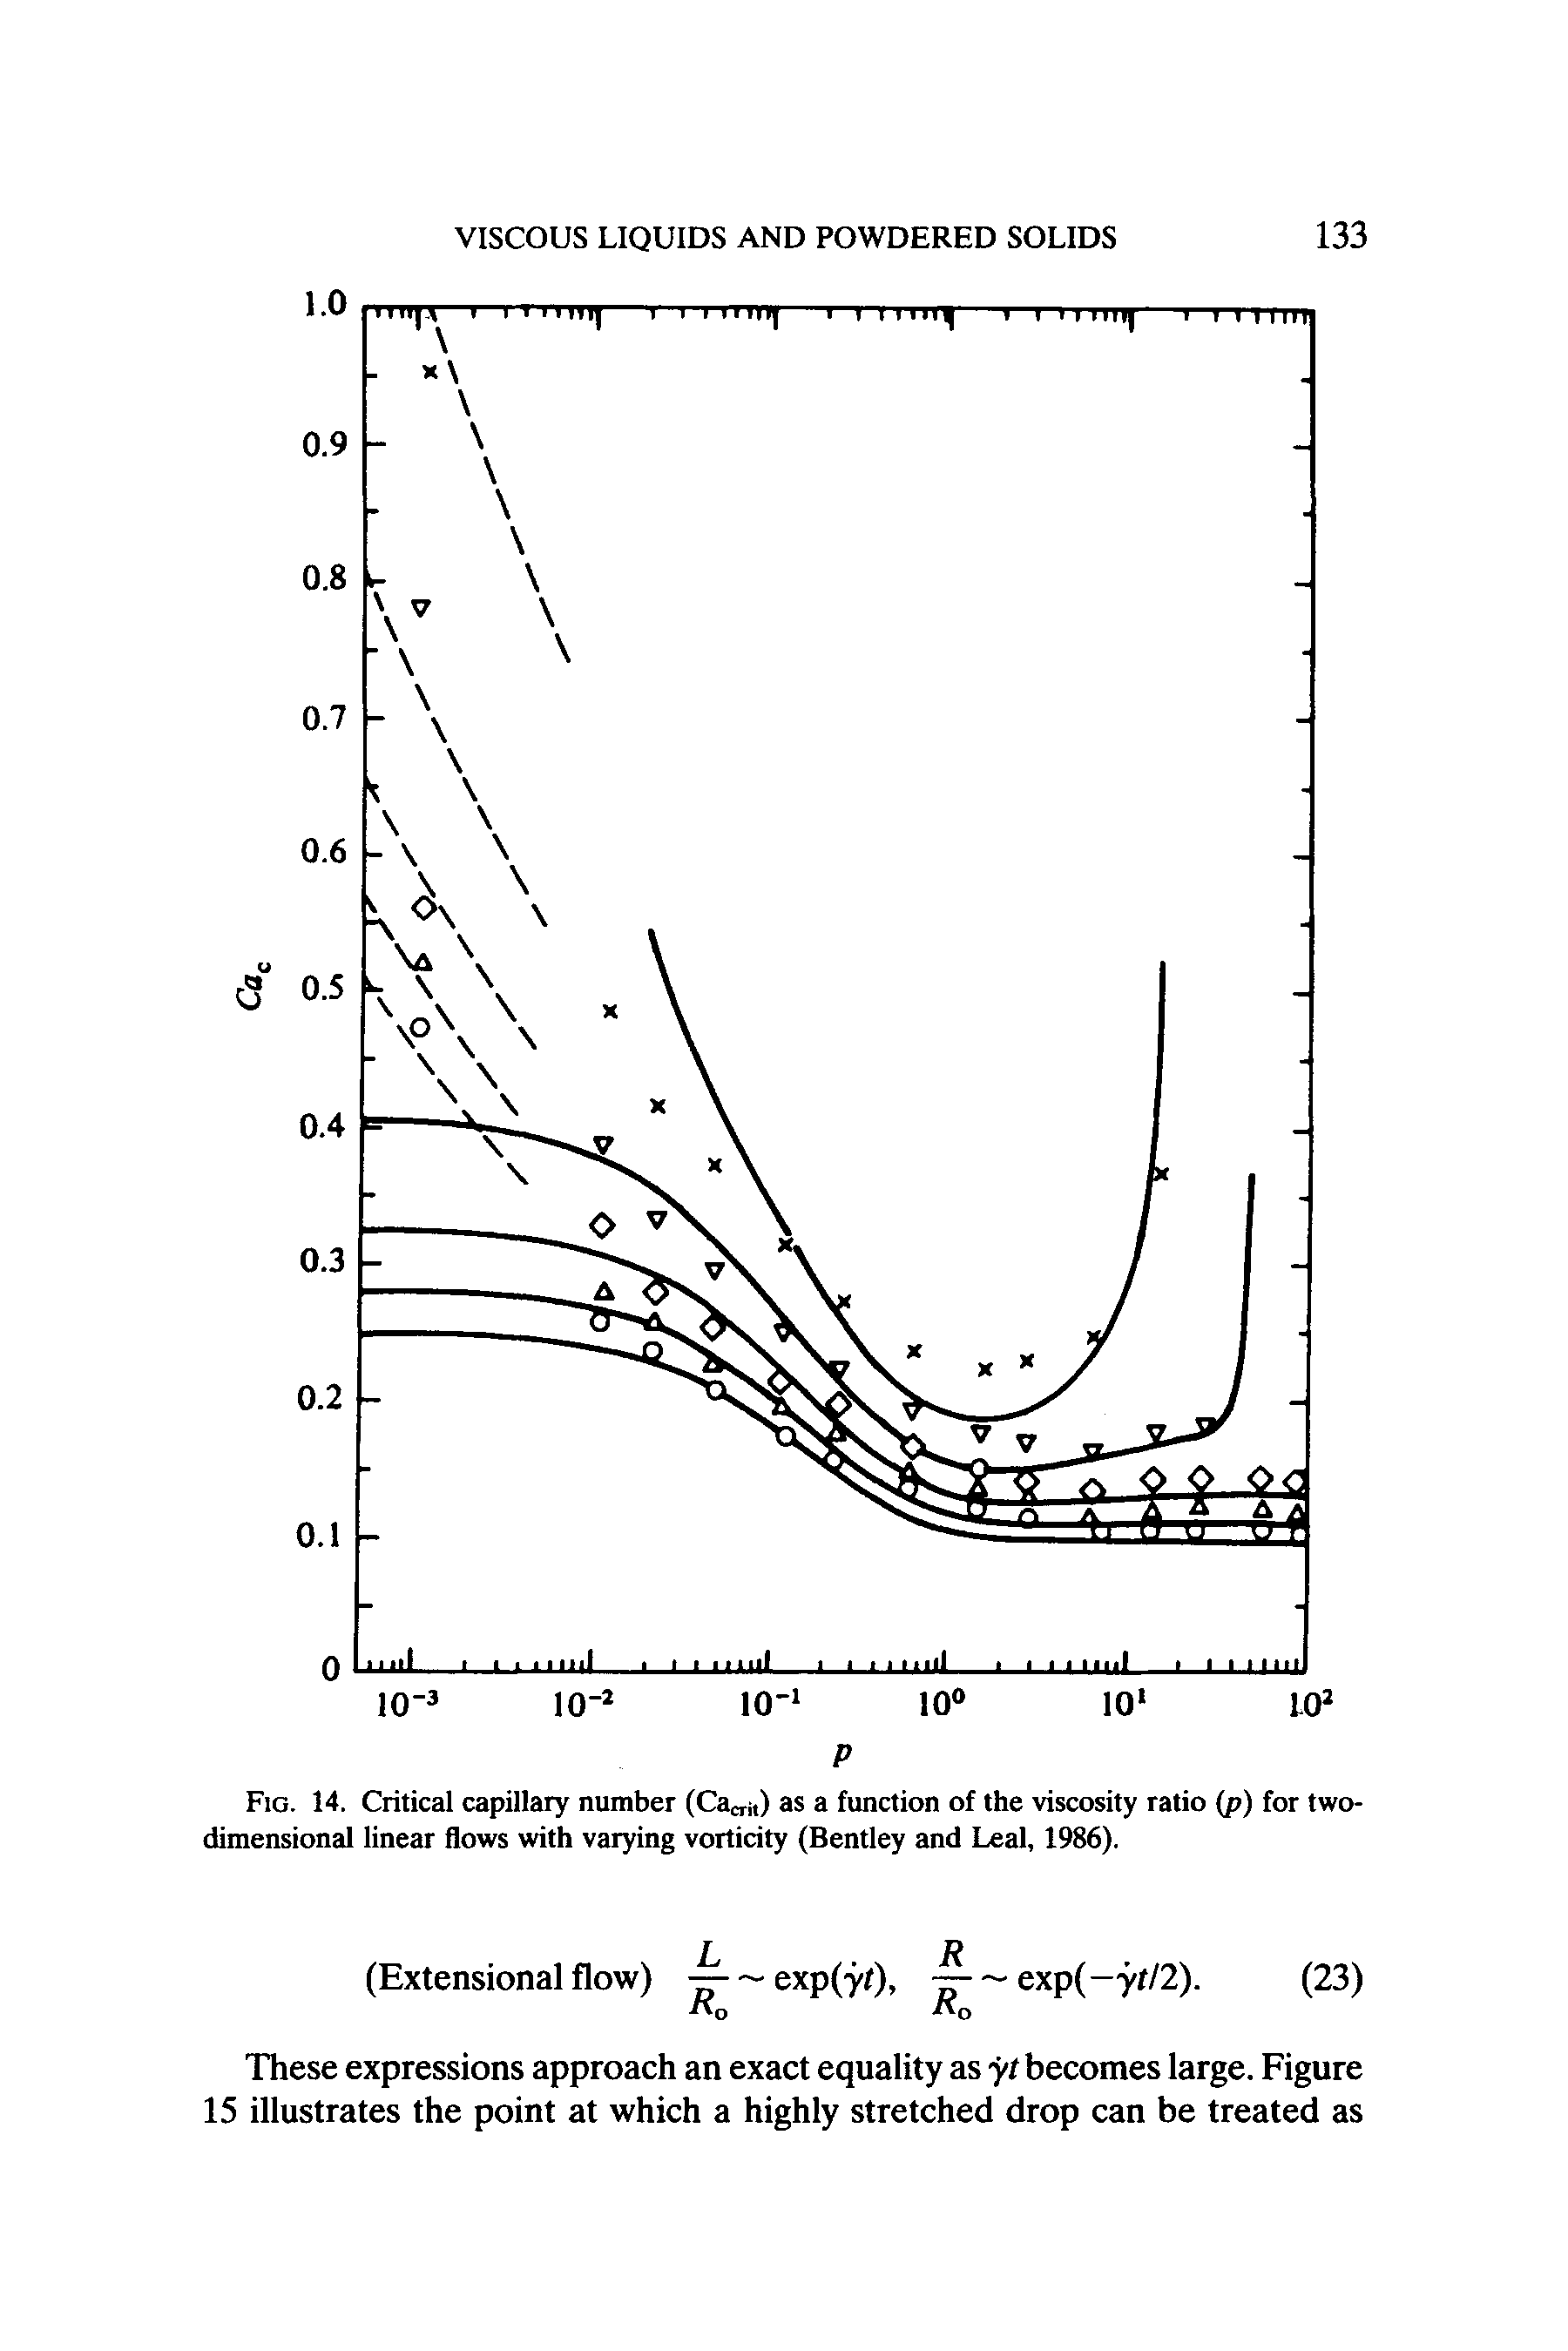 Fig. 14. Critical capillary number (Cac ) as a function of the viscosity ratio (p) for two-dimensional linear flows with varying vorticity (Bentley and Leal, 1986).